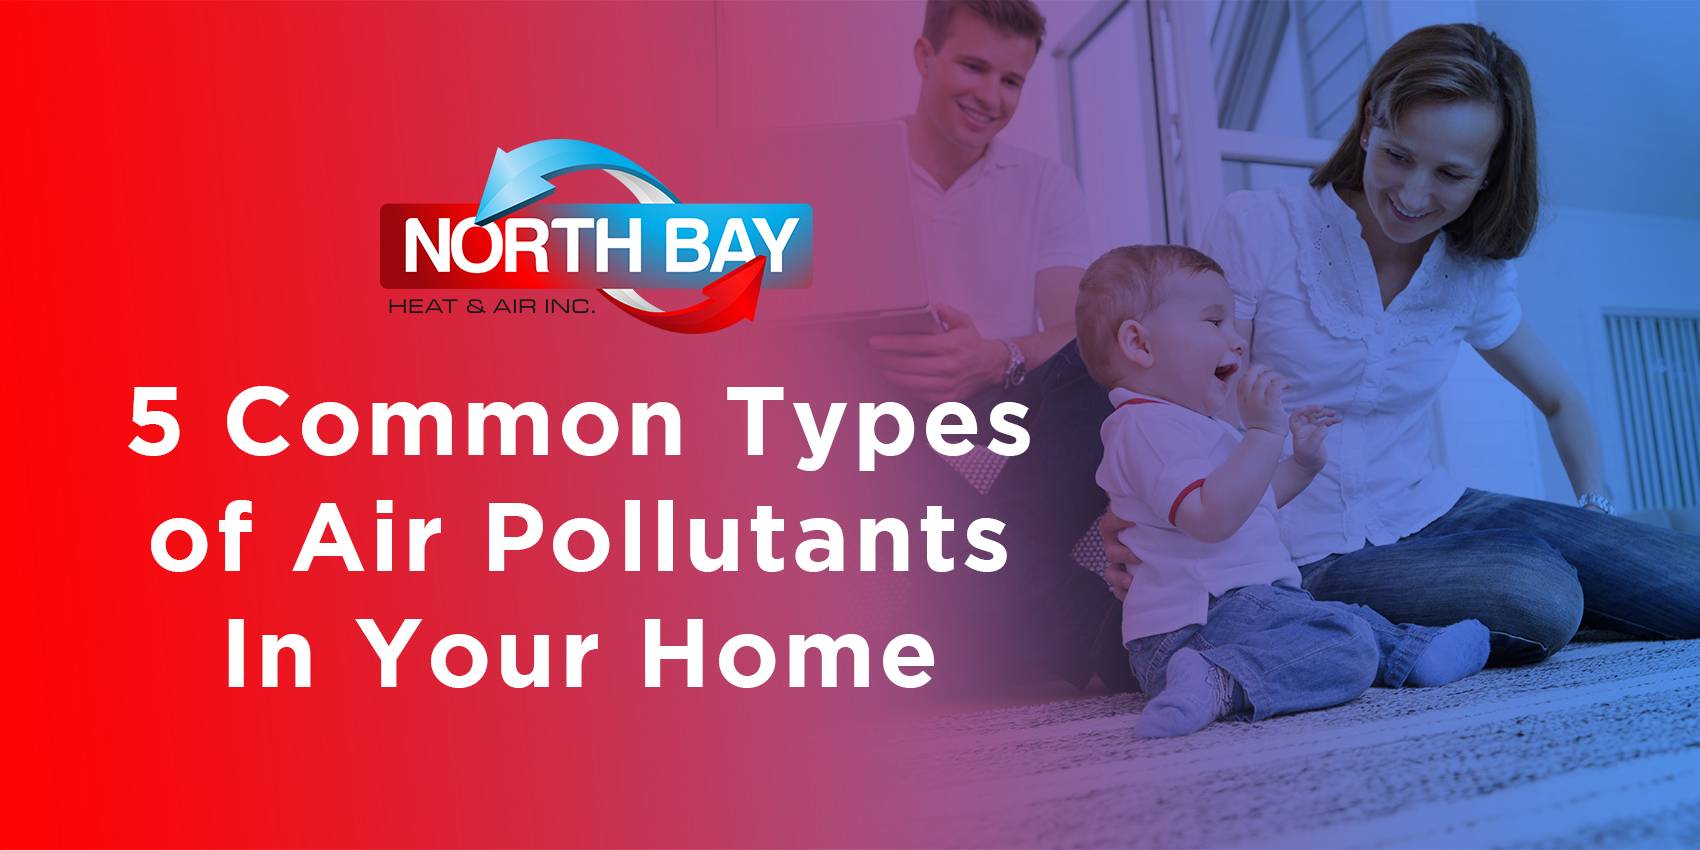 5 Common Types of Air Pollutants In Your Home